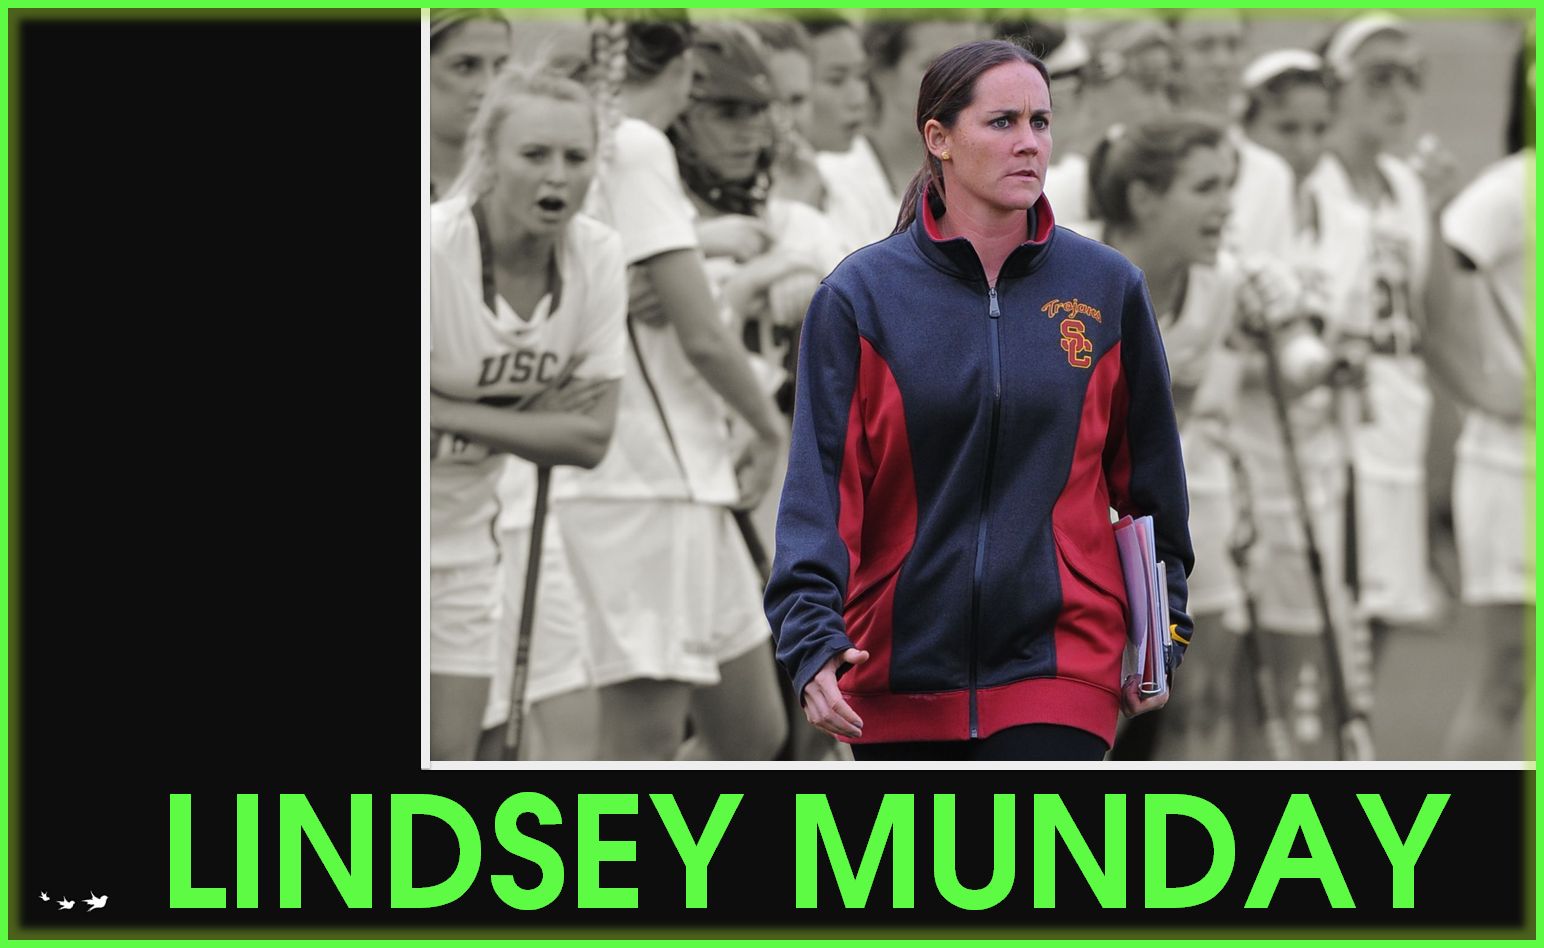 Lindsey Munday west coast lacrosse podcast interview business travel website